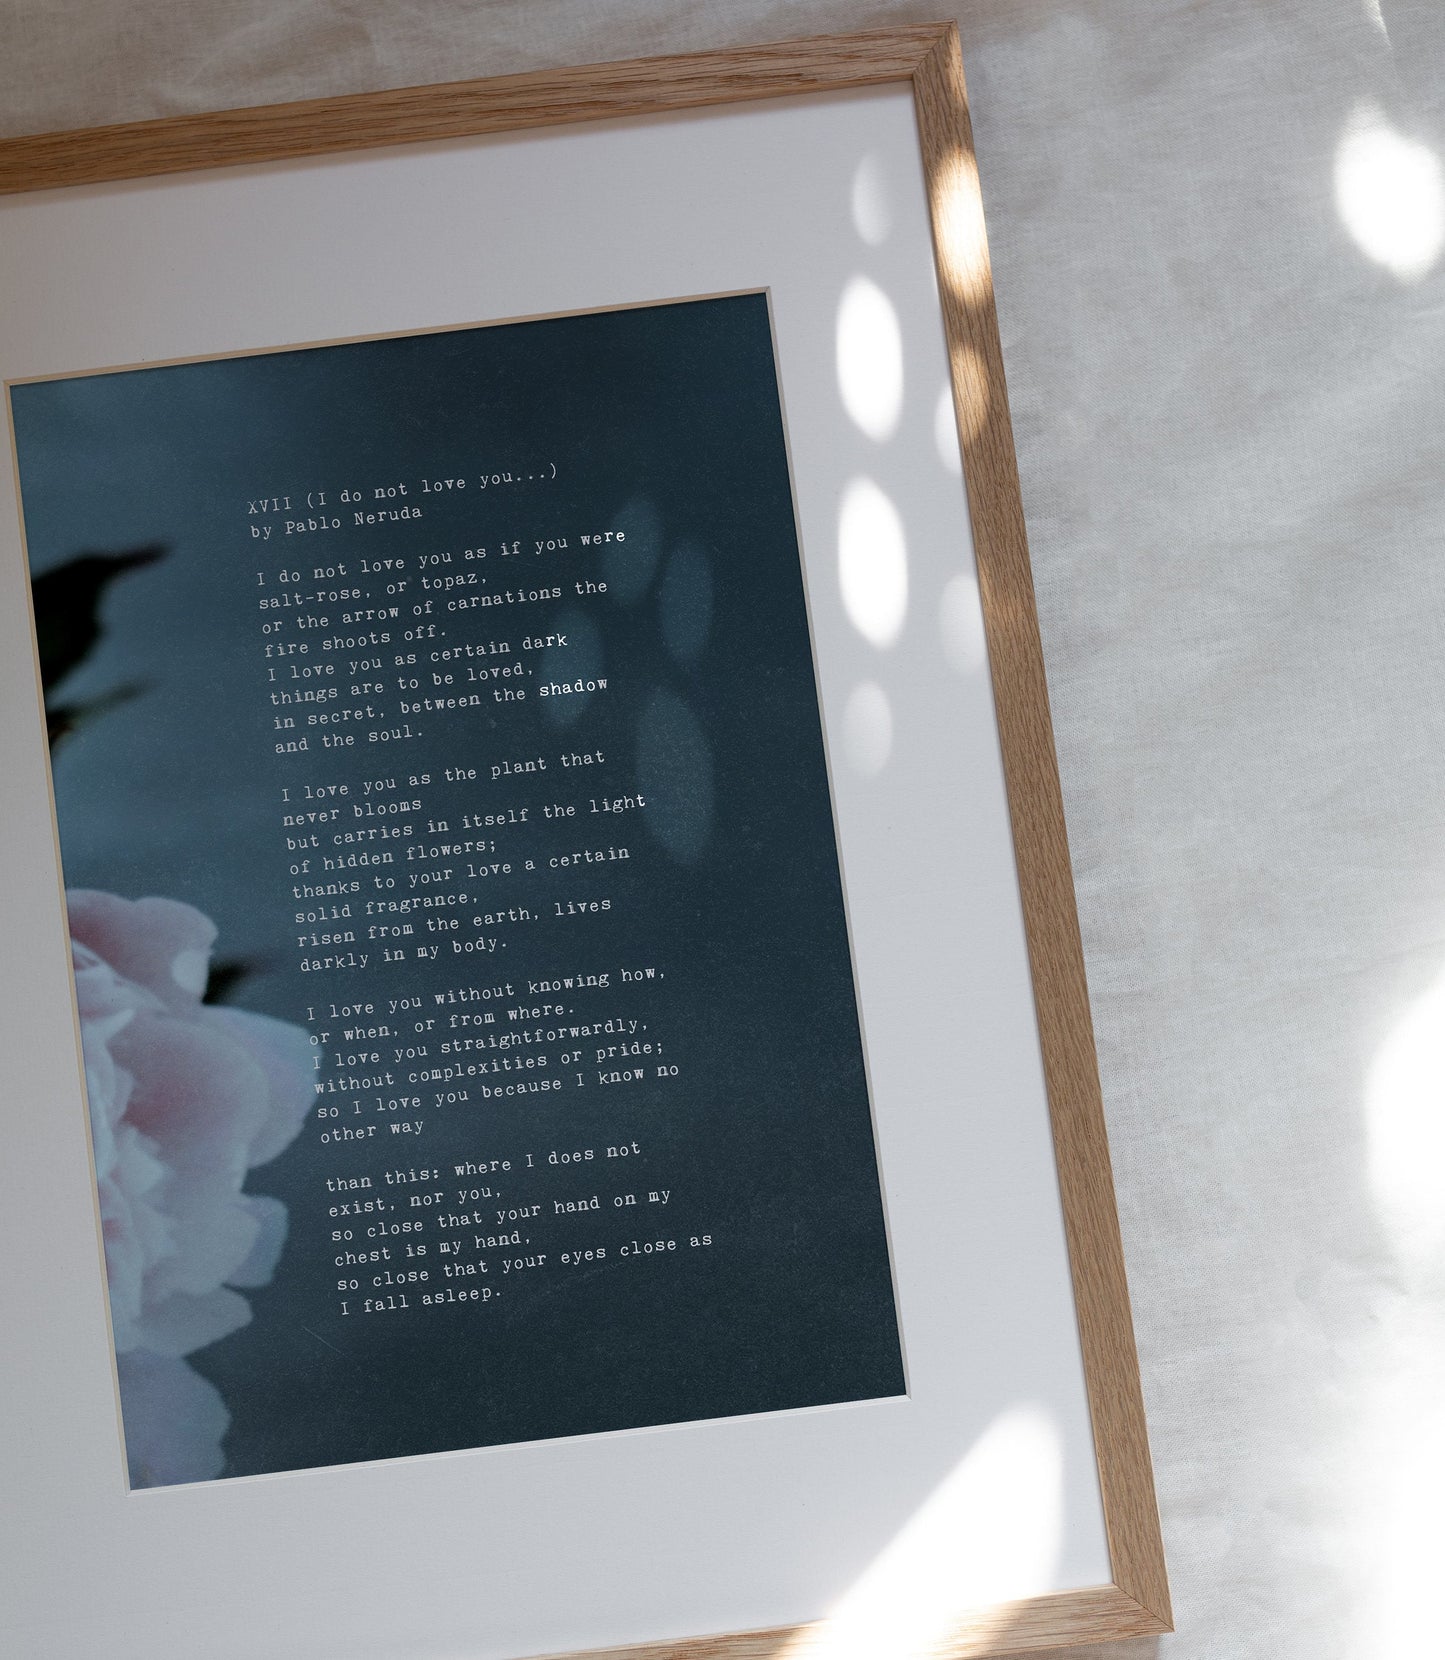 Pablo Neruda love poem wall art. "I love you as certain dark things are to be loved". Gift for significant other.